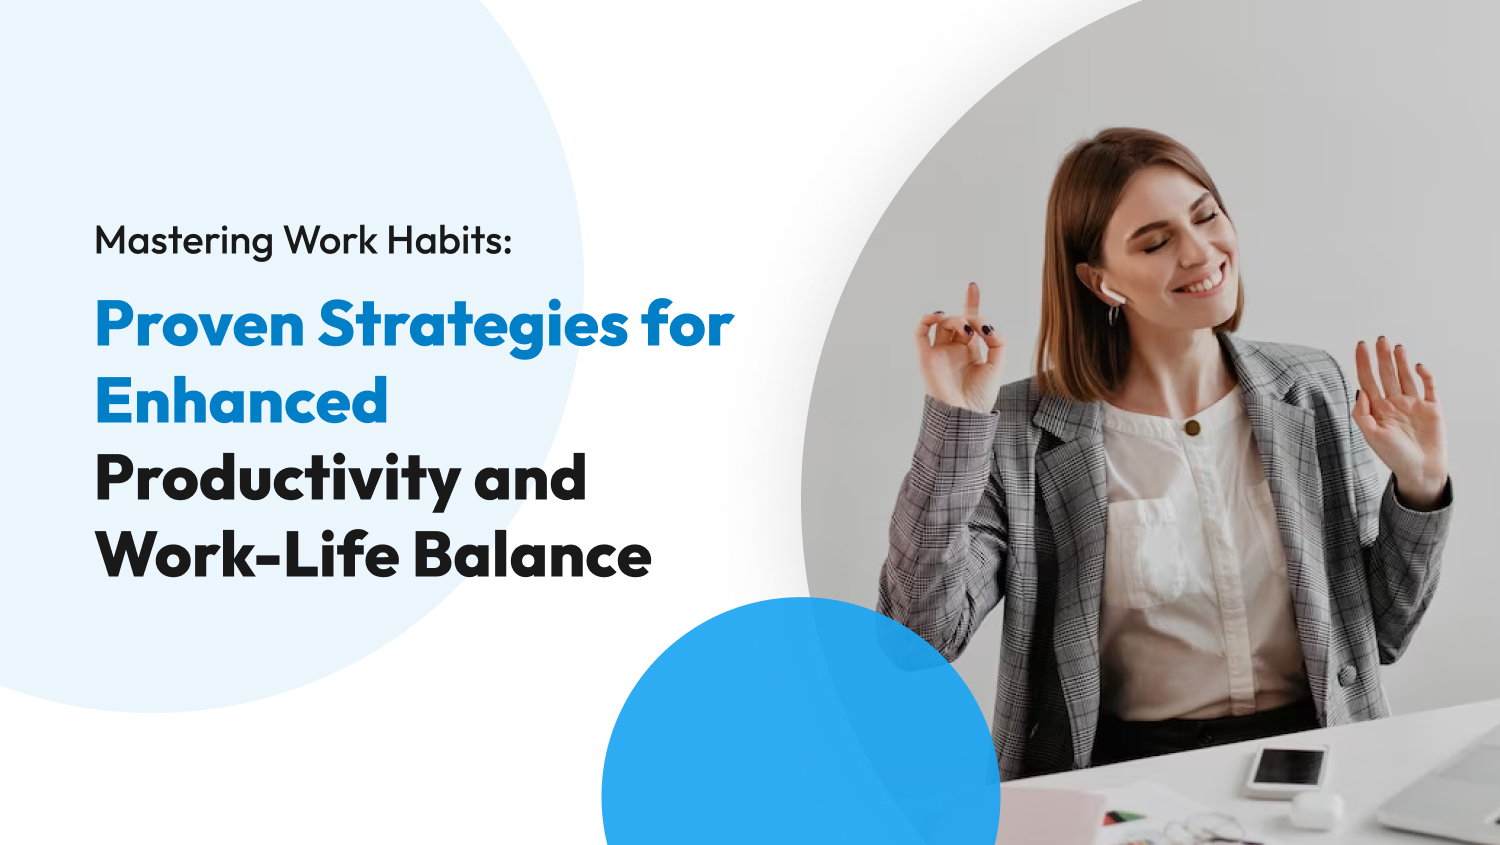 Mastering Work Habits: Proven Strategies for Enhanced Productivity and Work-Life Balance